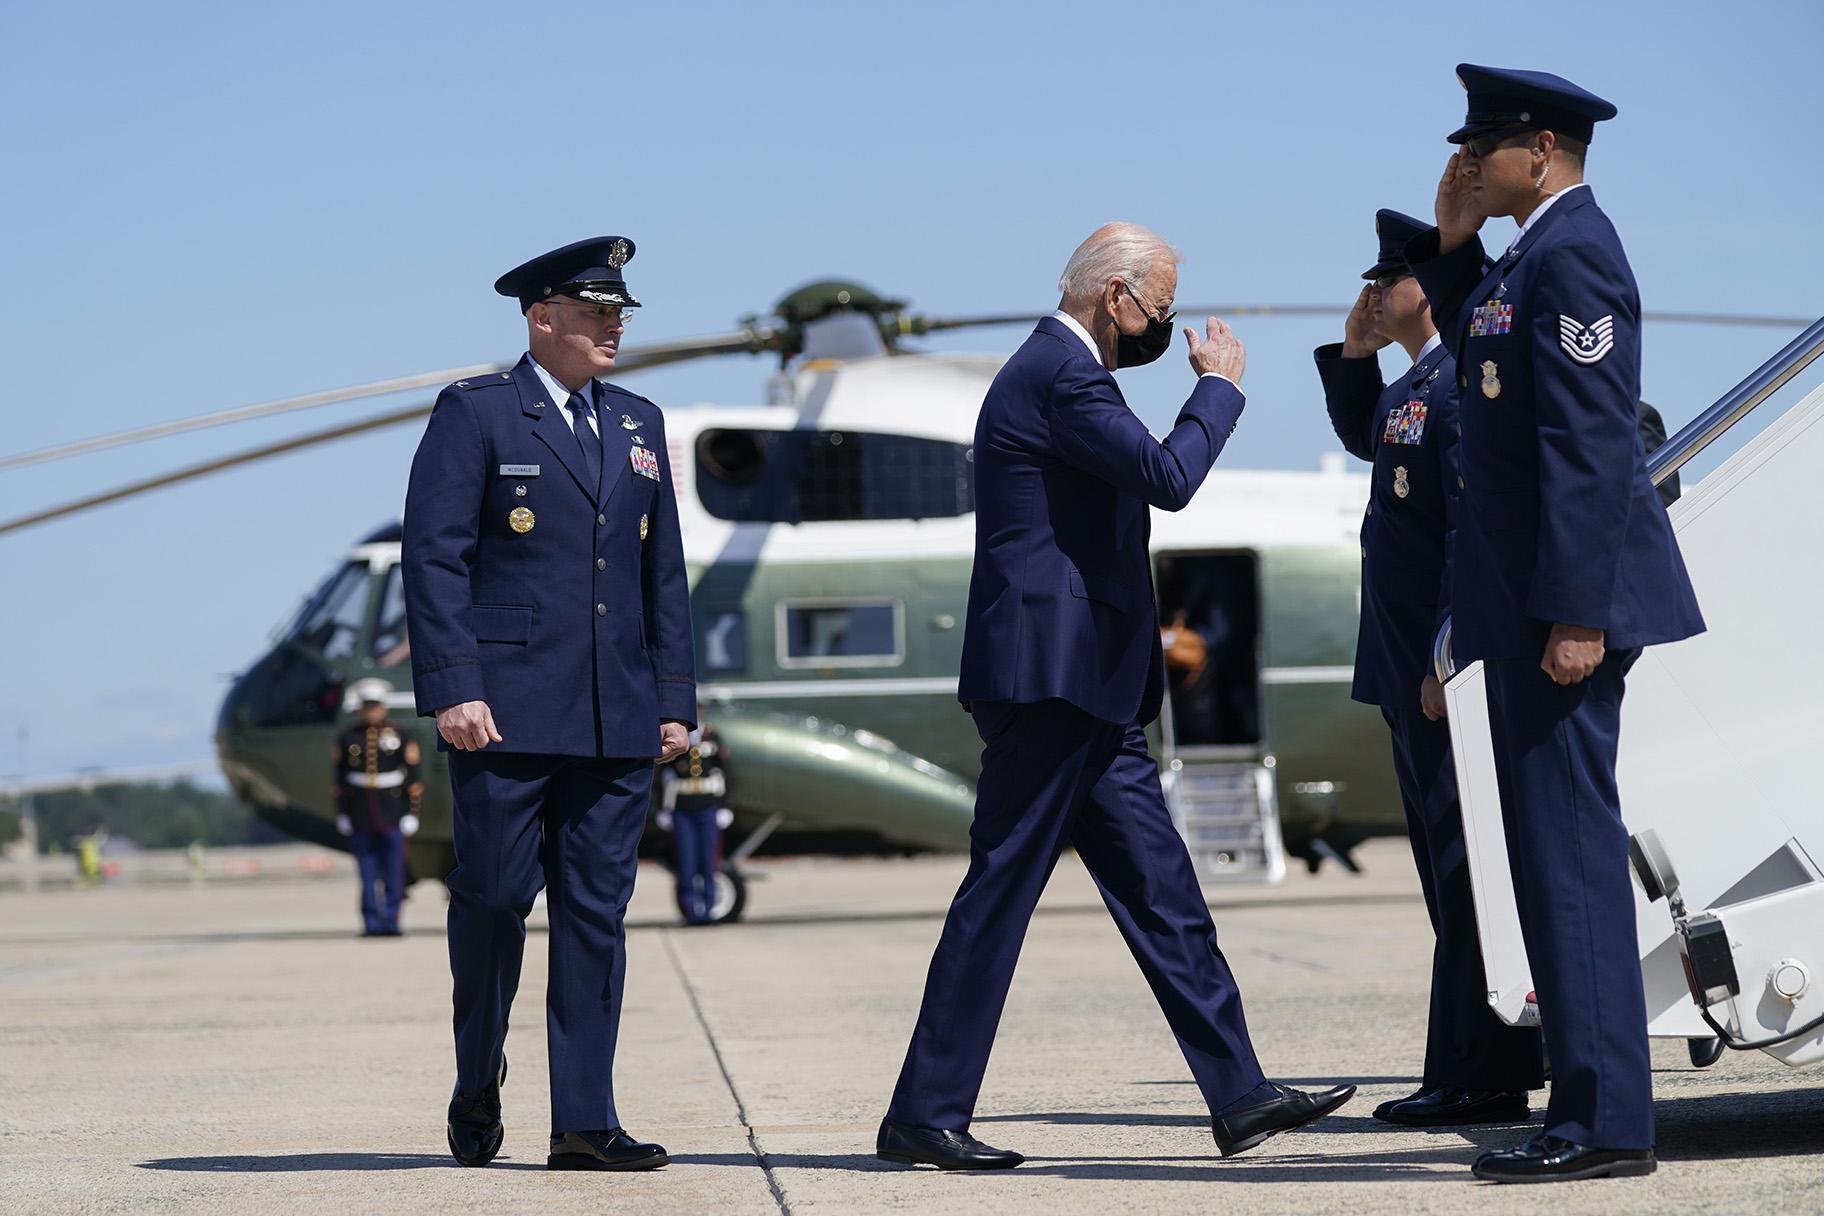 President Joe Biden returns a salute as he walks to board Air Force One to travel to Louisiana to view damage caused by Hurricane Ida, Friday, Sept. 3, 2021, in Andrews Air Force Base, Md. (AP Photo / Evan Vucci)